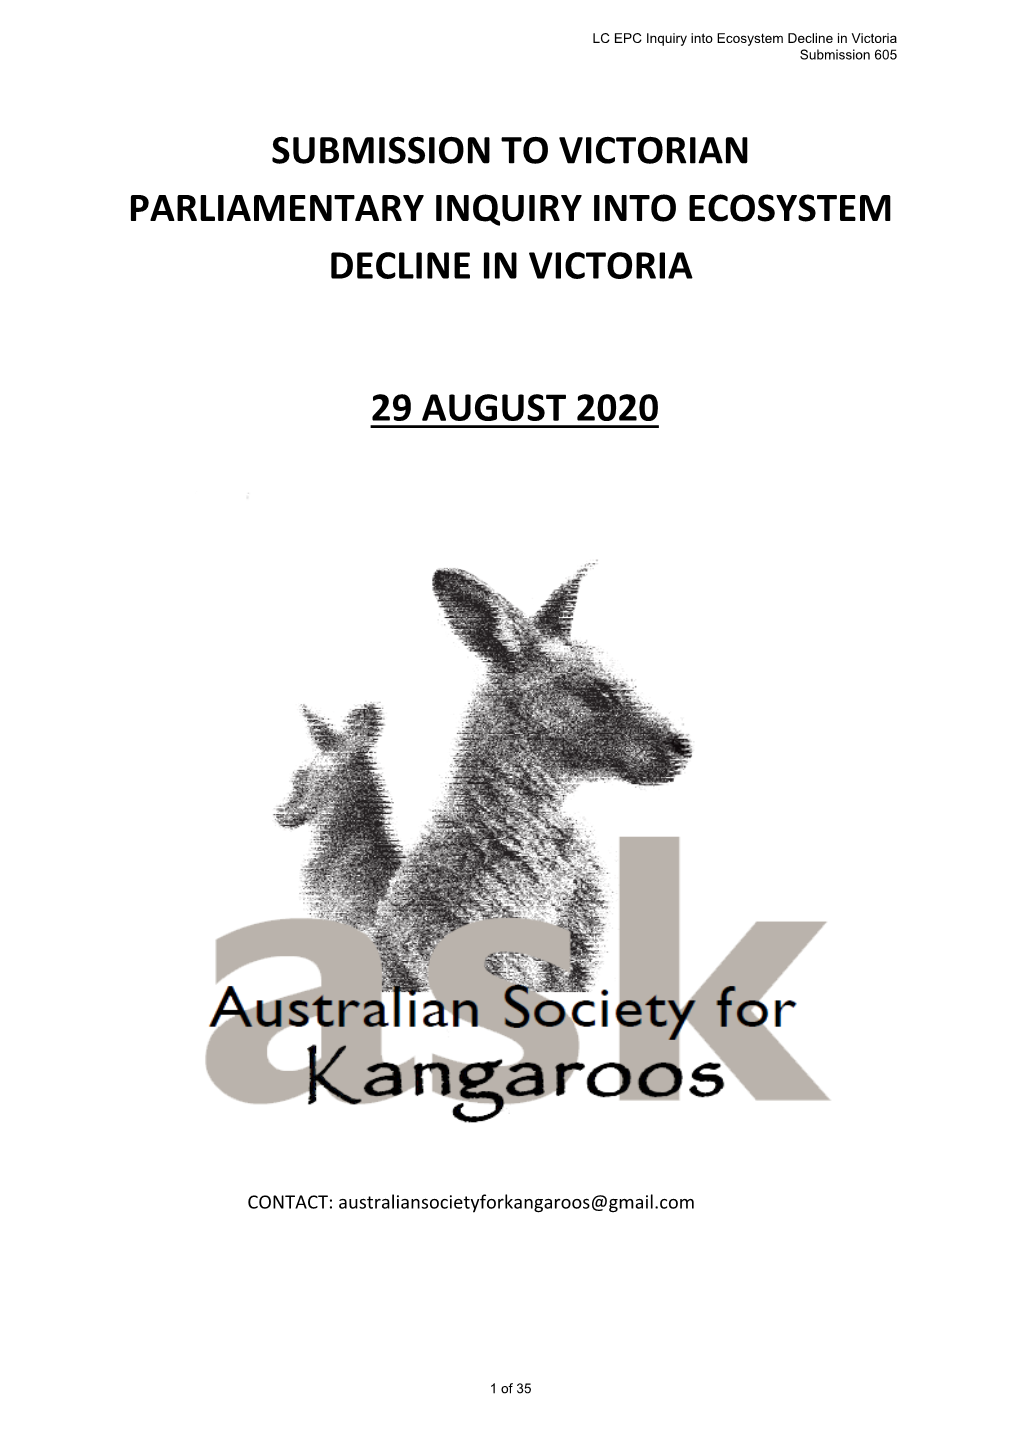 Submission to Victorian Parliamentary Inquiry Into Ecosystem Decline in Victoria